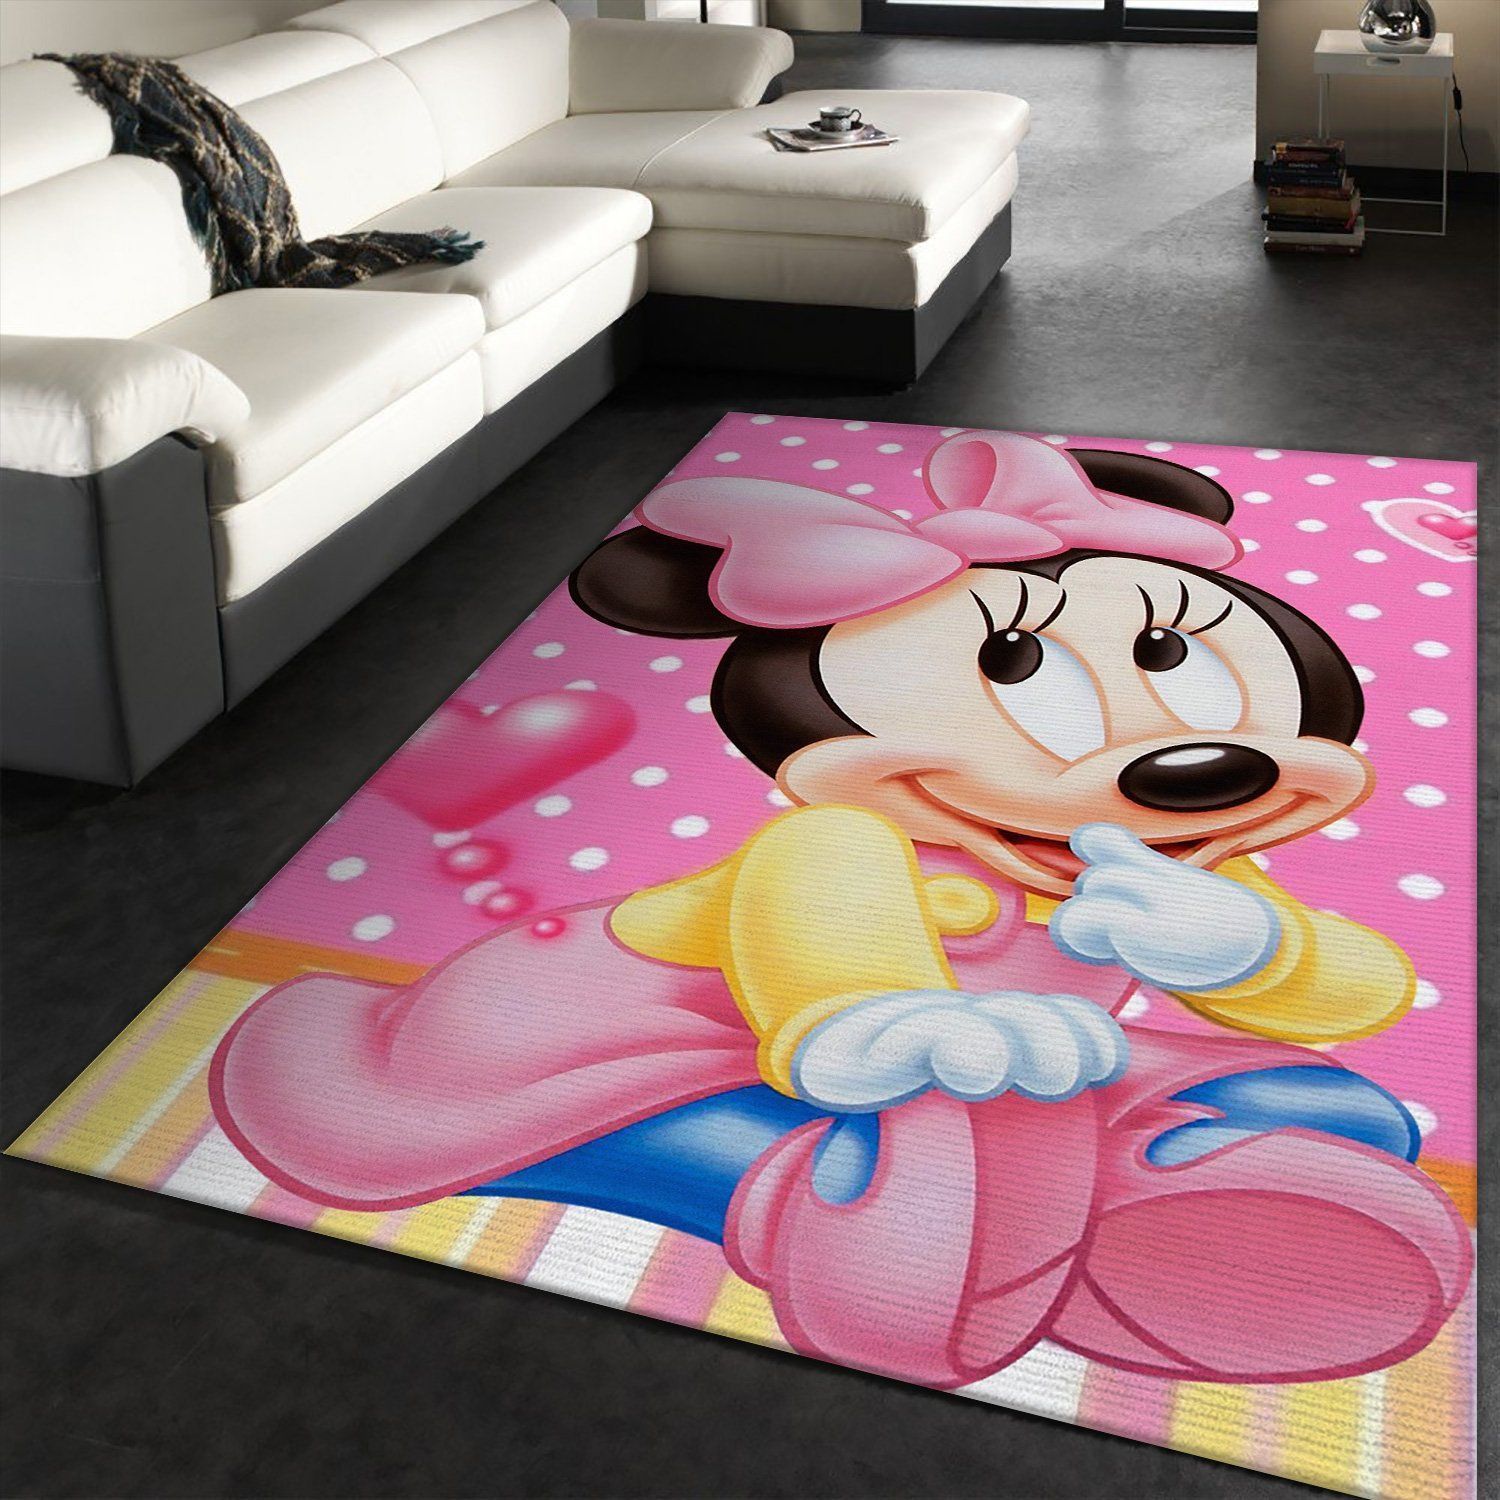 Minnie Mouse Disney Movies Area Rugs Living Room Carpet Floor Decor The US Decor - Indoor Outdoor Rugs